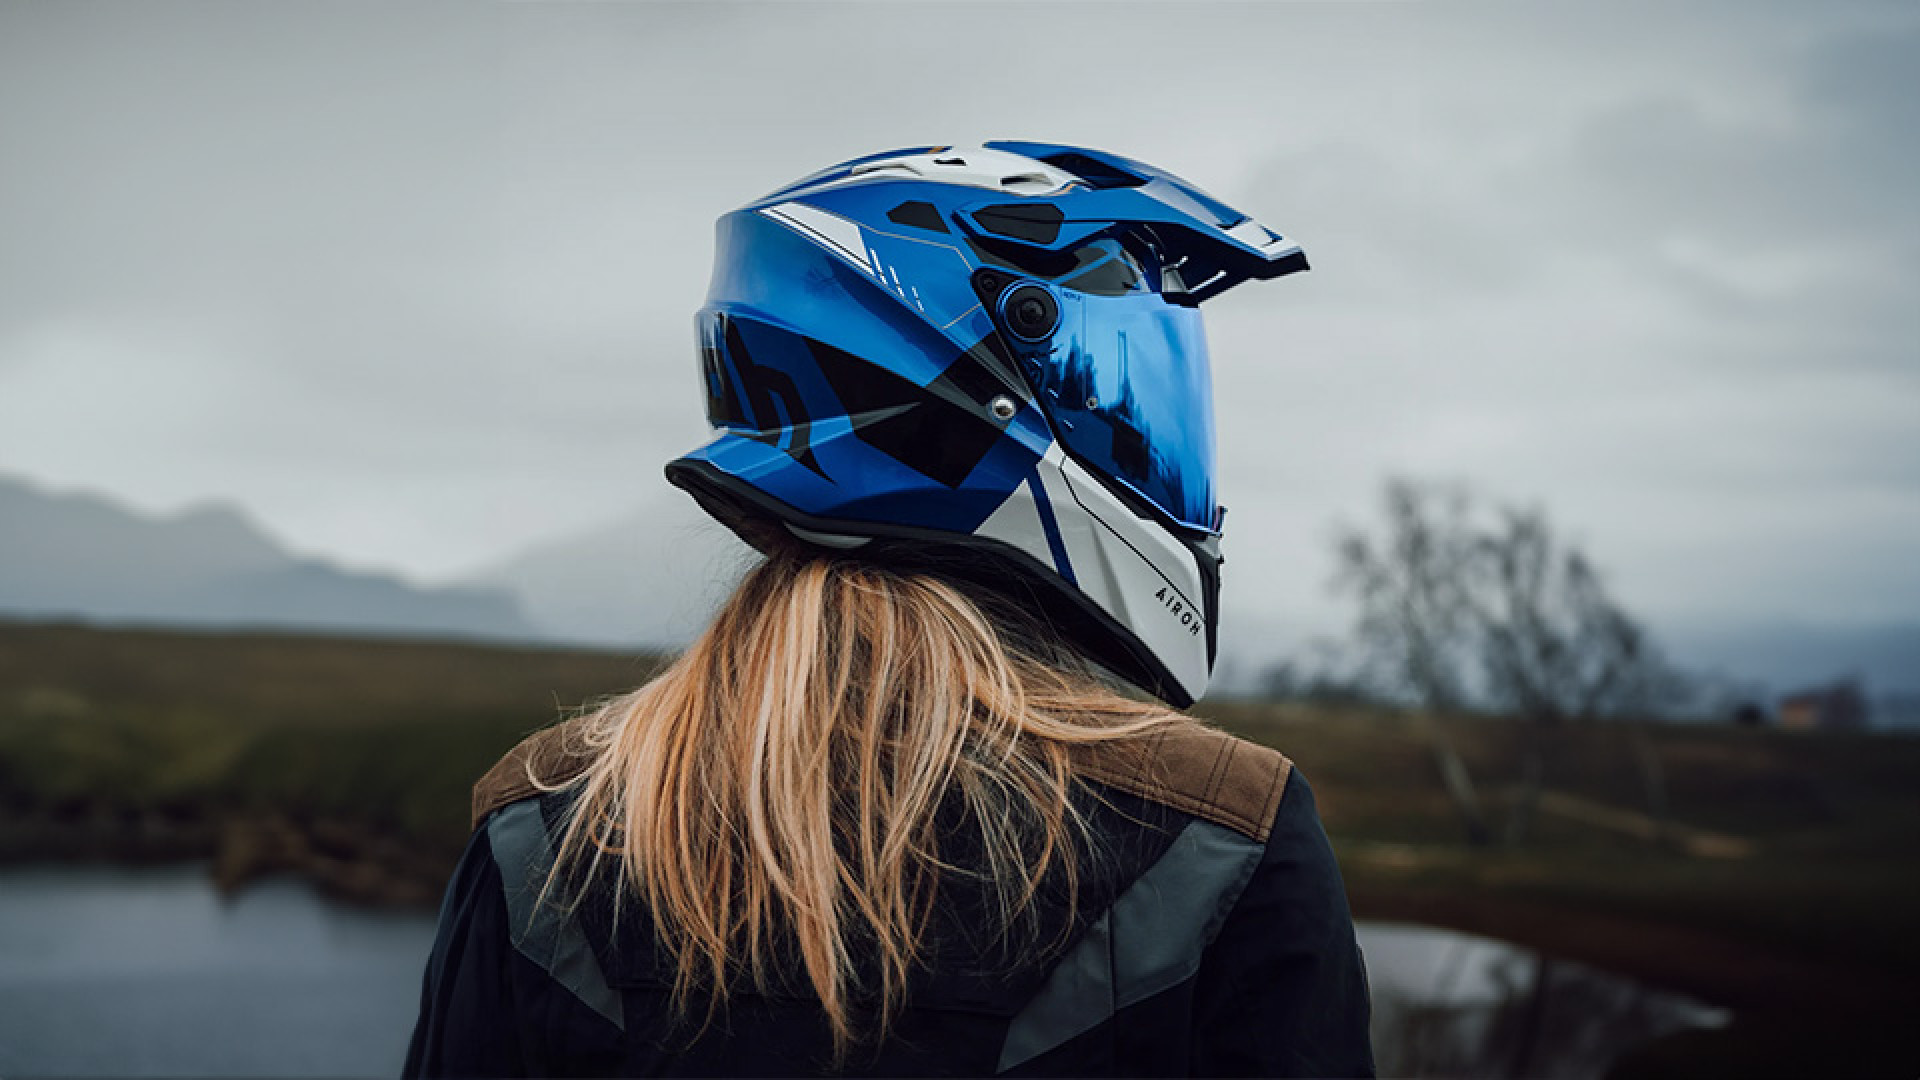 https://www.raceleathers.co.uk/image/cache/catalog/Blog%20Images/Airoh%20Commander%202%20Motorcycle%20Helmet%20Product%20Review-1920x1080.jpg